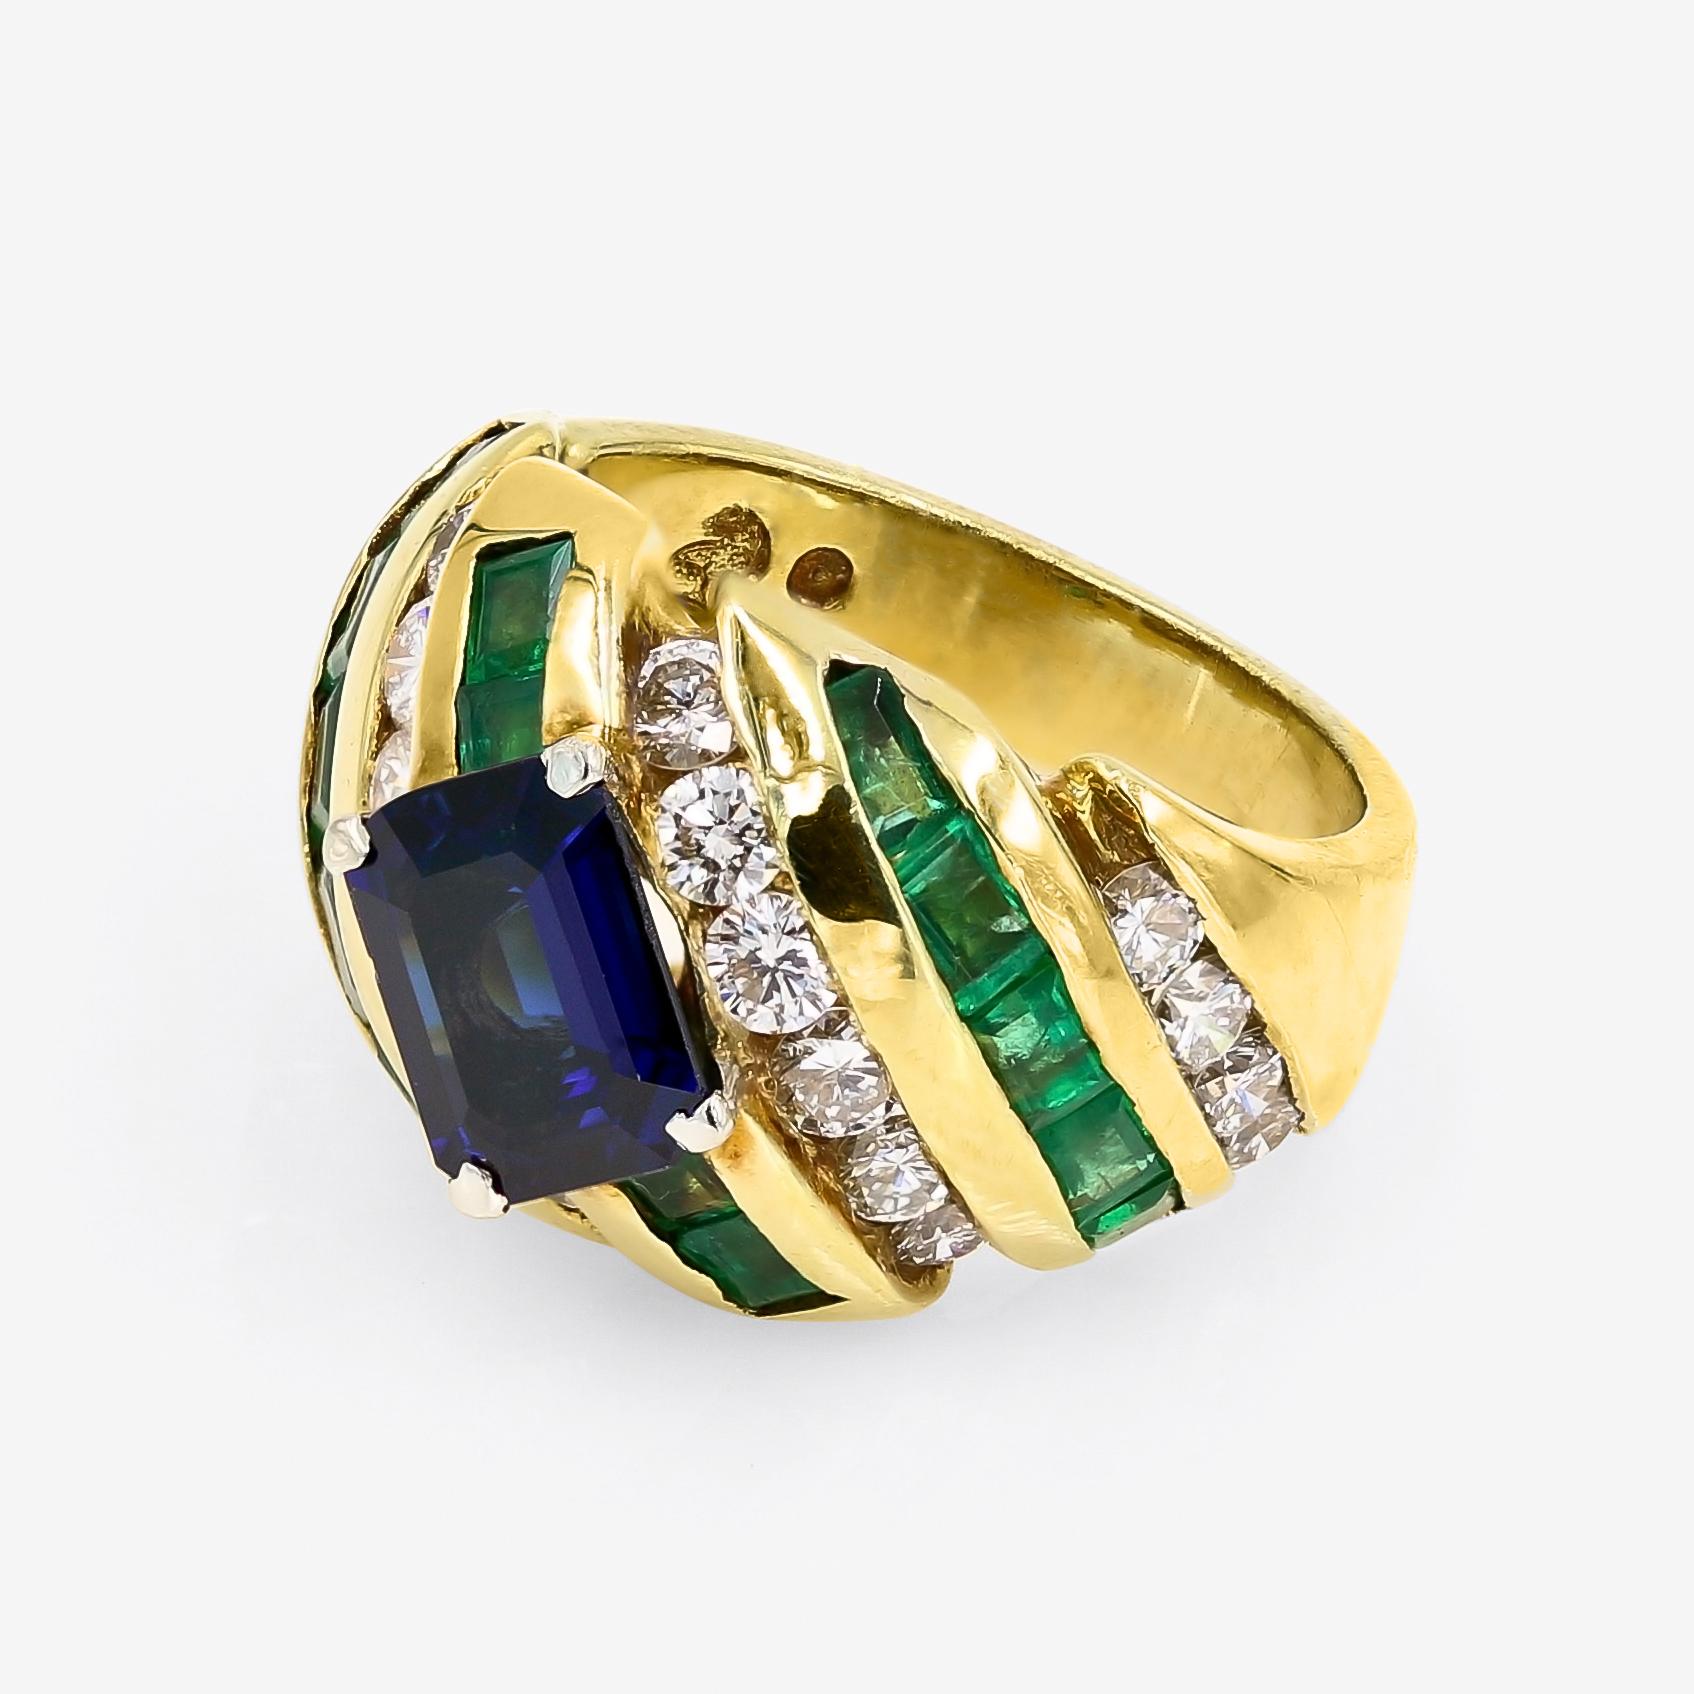 Contemporary Emerald, Sapphire and Diamond Ring in 18 Karat Yellow Gold